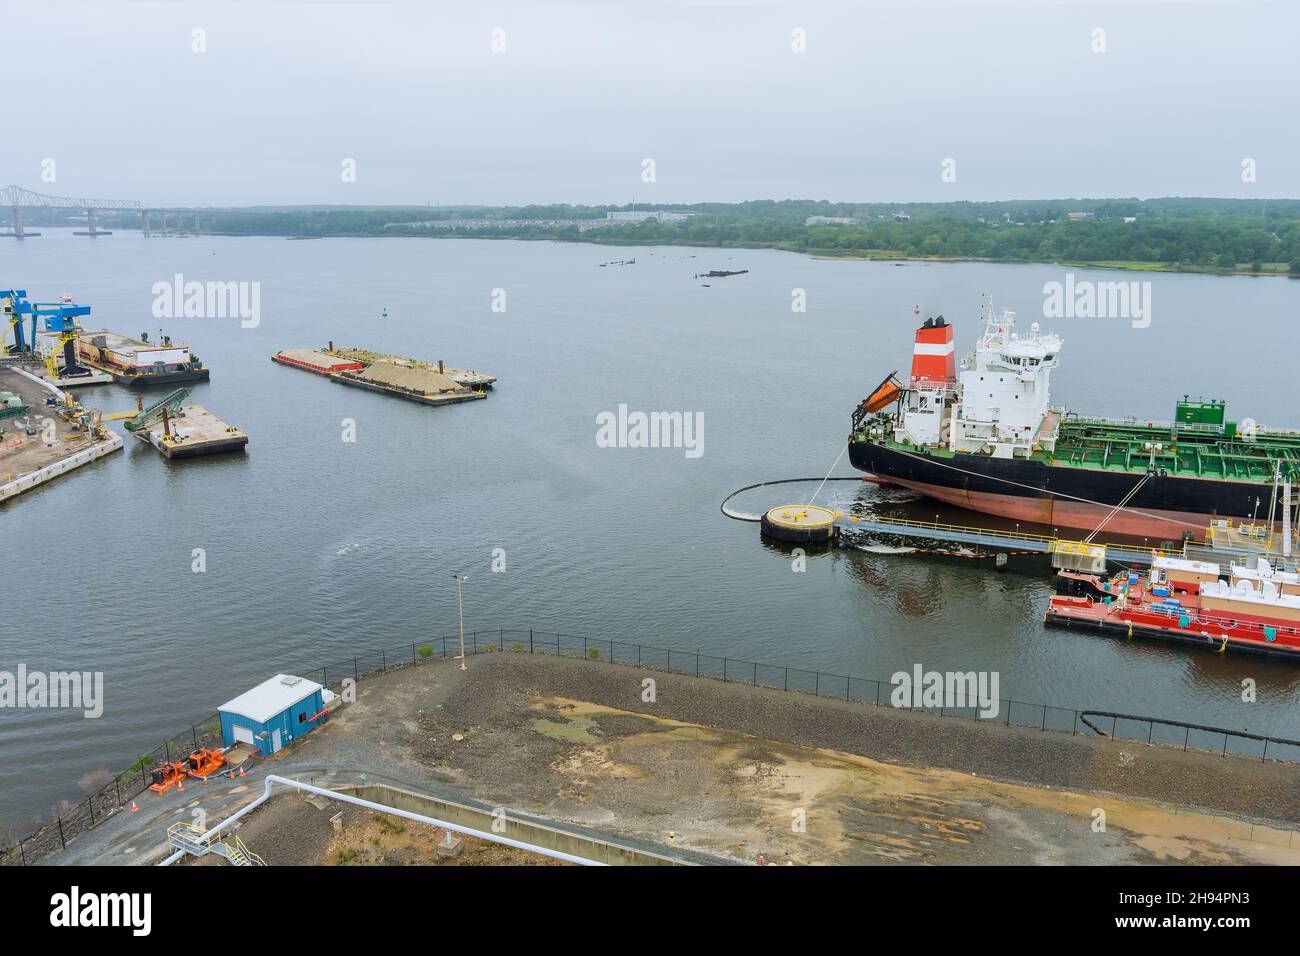 Aerial view tanker ship, oil ship operation during petroleum transfer Stock Photo